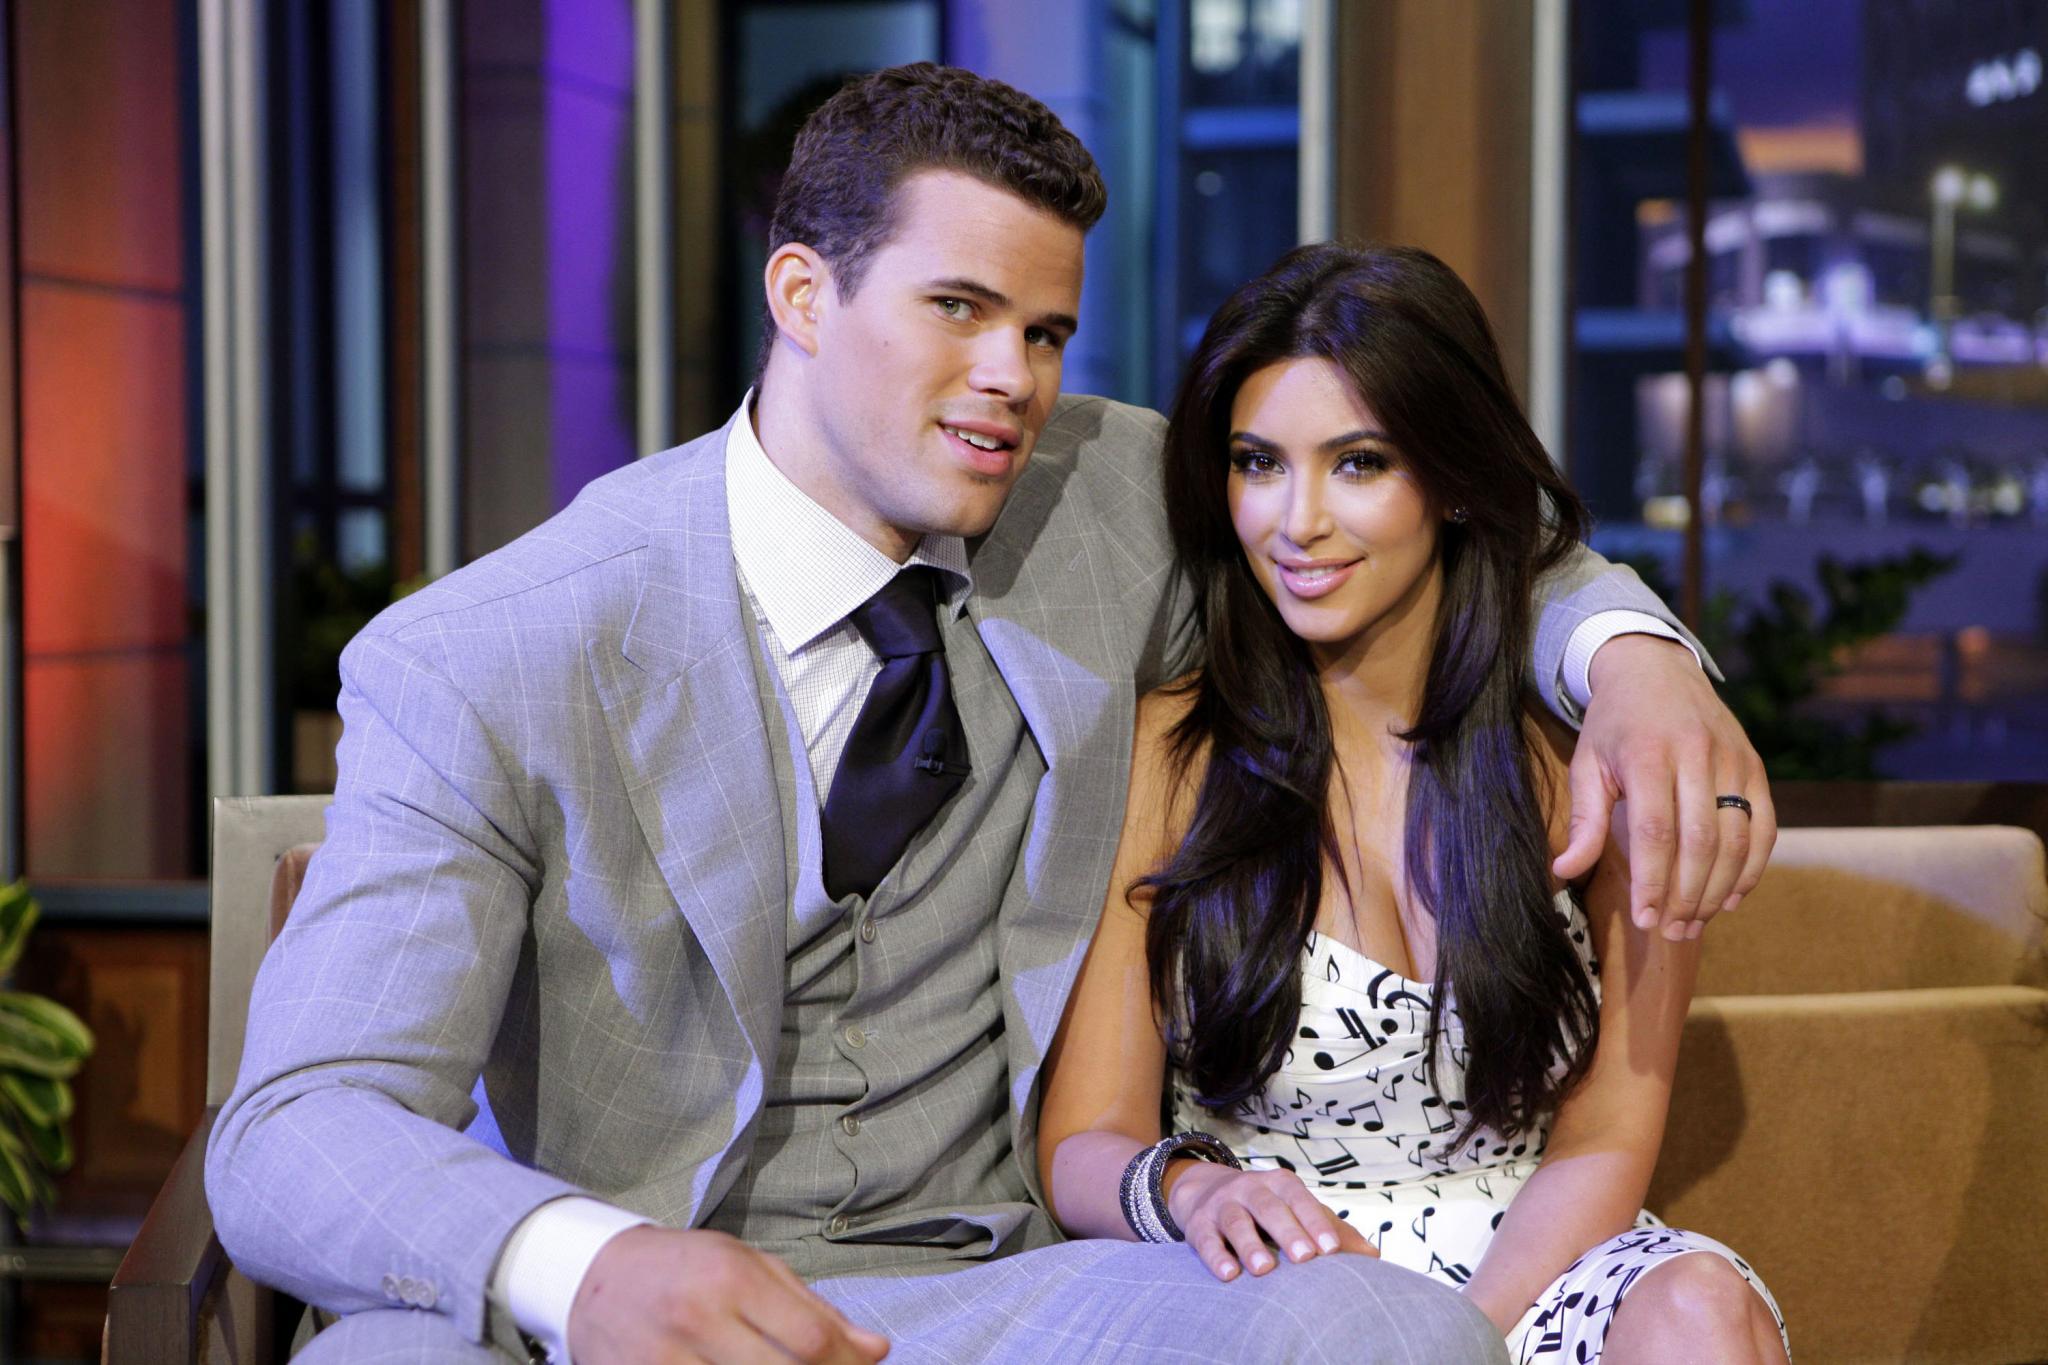 18 Celeb Couples Whose Marriages Suffered After They Appeared on Reality TV
